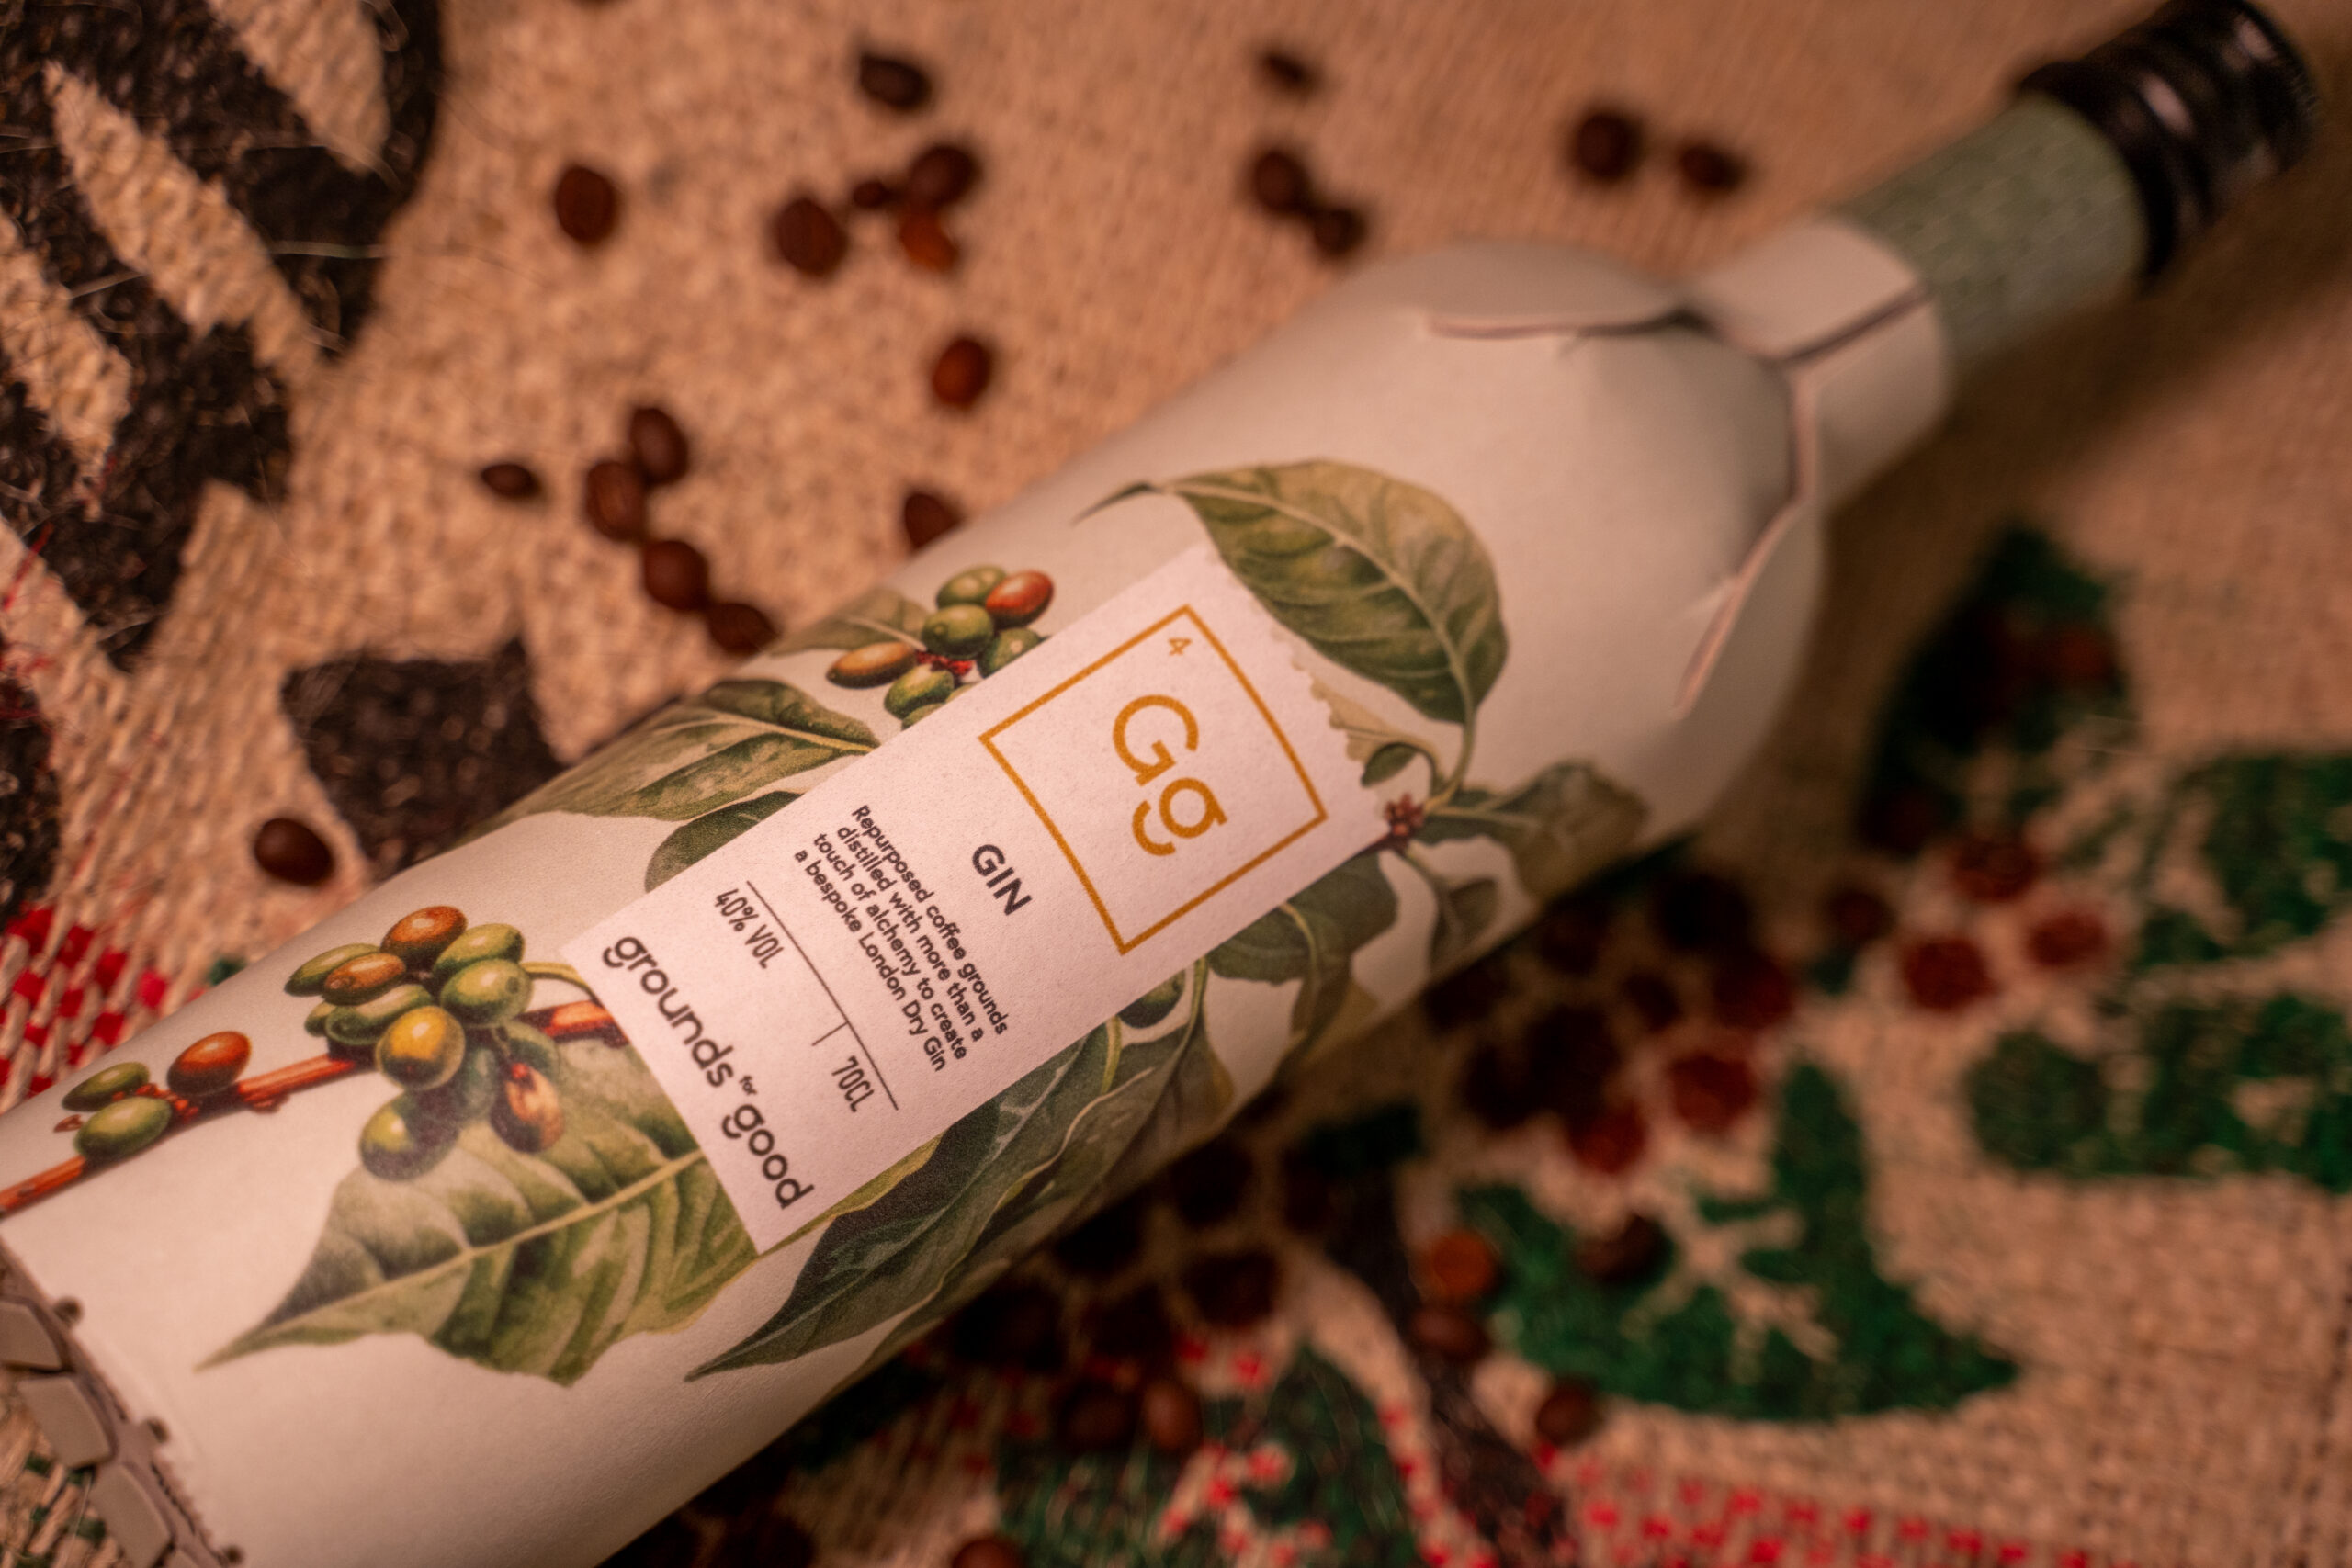 Frugalpac helps launch gin made from coffee grounds in paper bottle